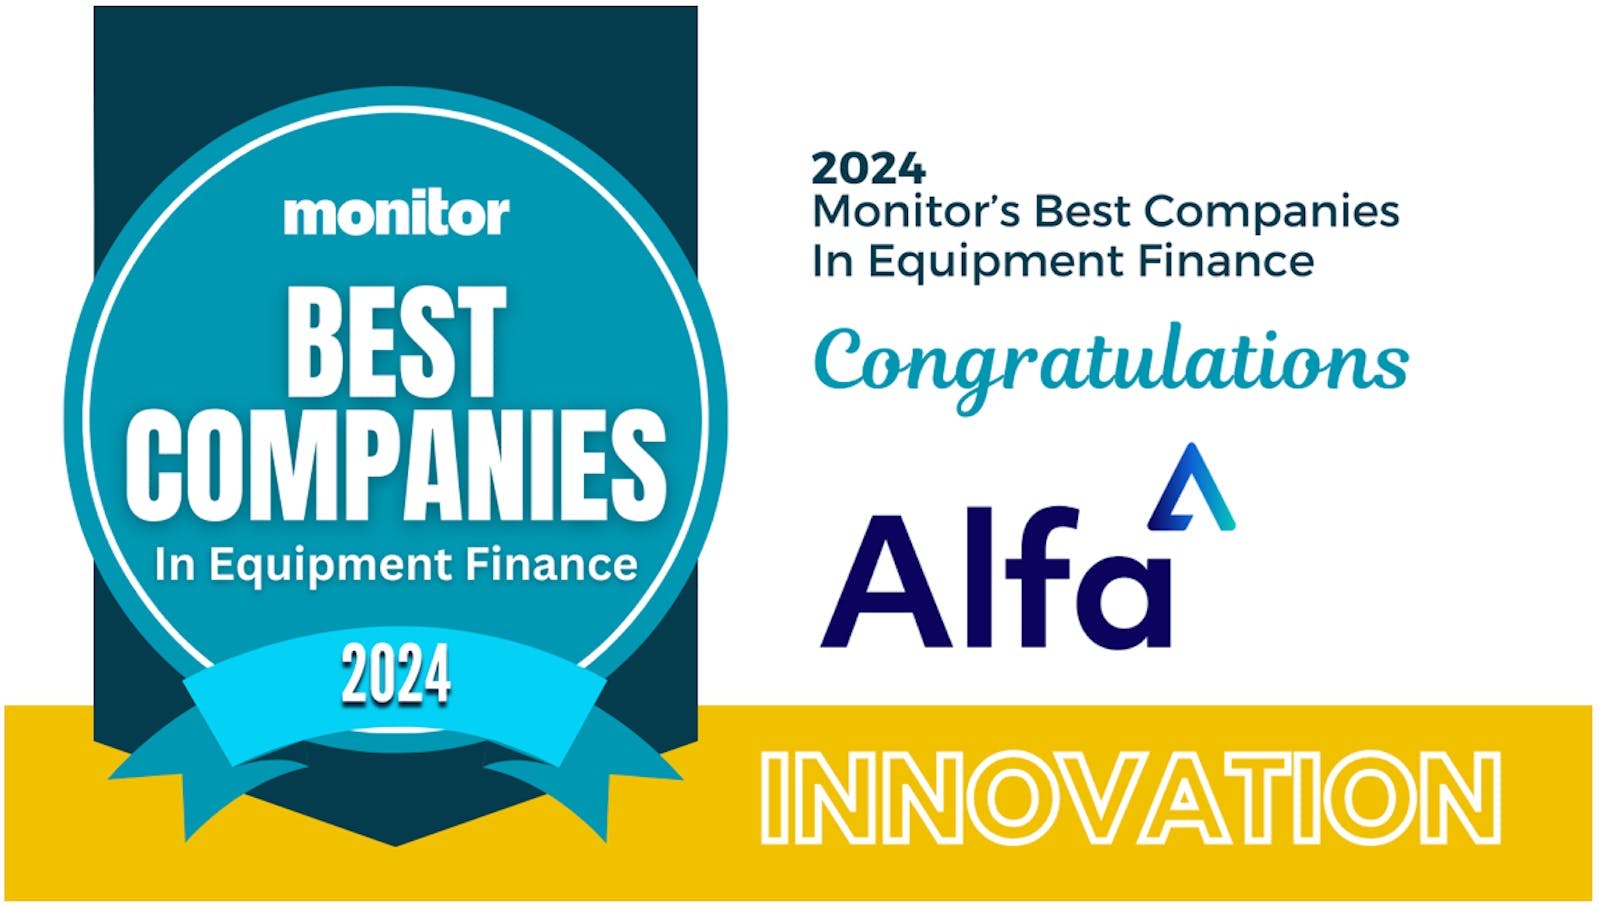 Alfa awarded Monitor Best Company in Equipment Finance 2024 for Innovation